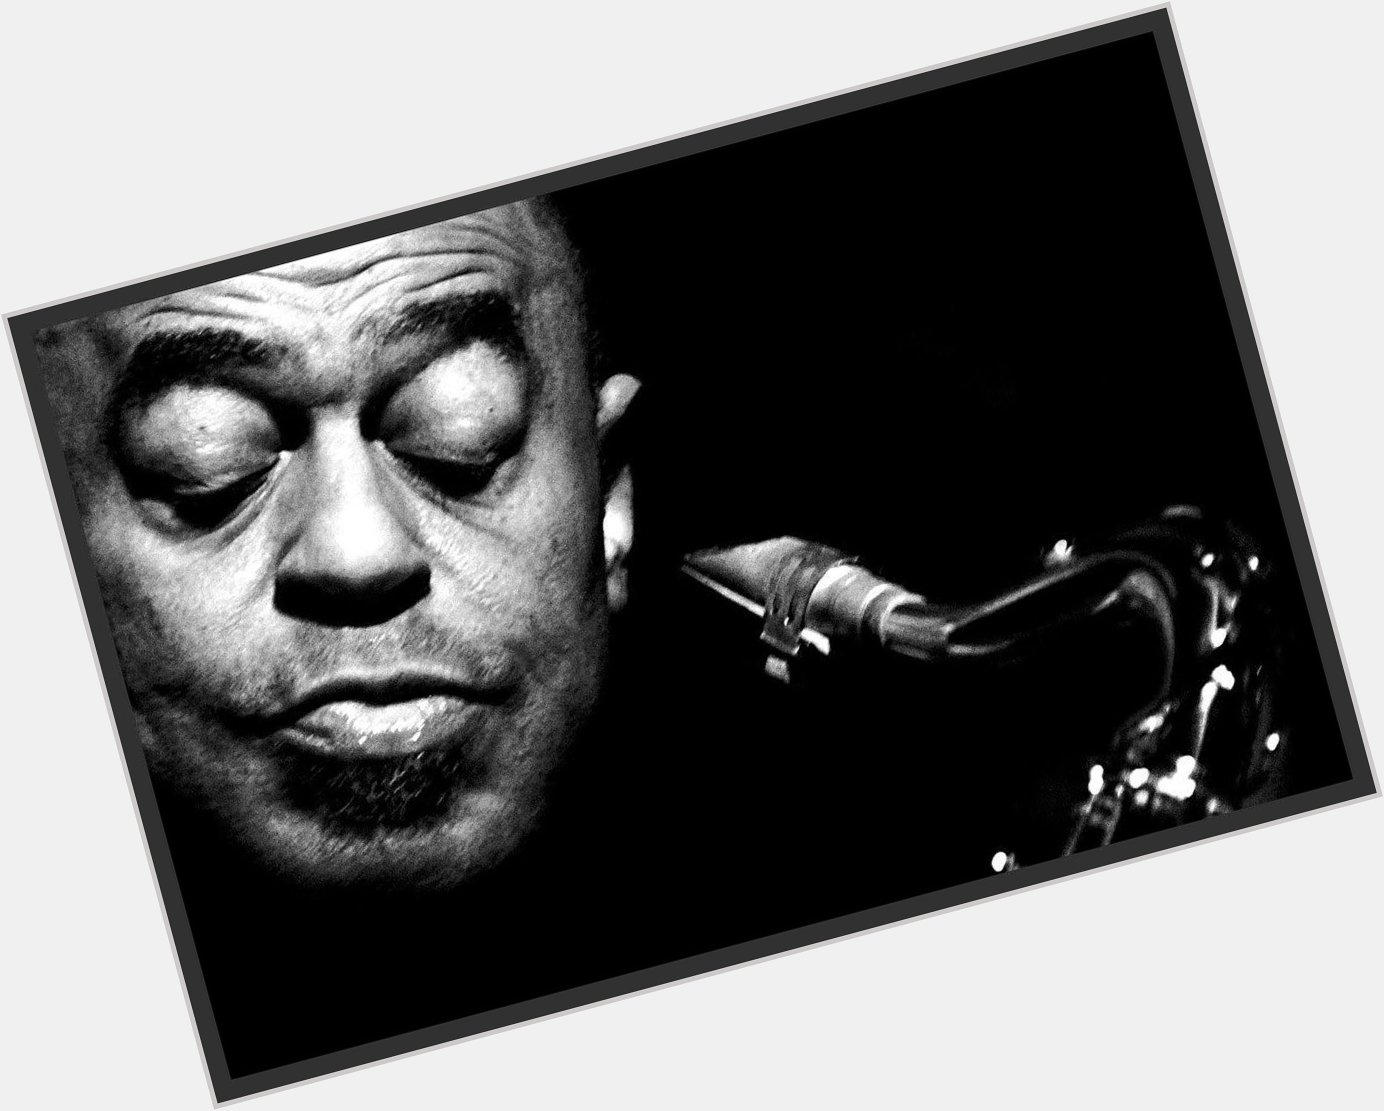 Happy 78th Birthday to Archie Shepp! On the jump to see you at Marciac August 9th 